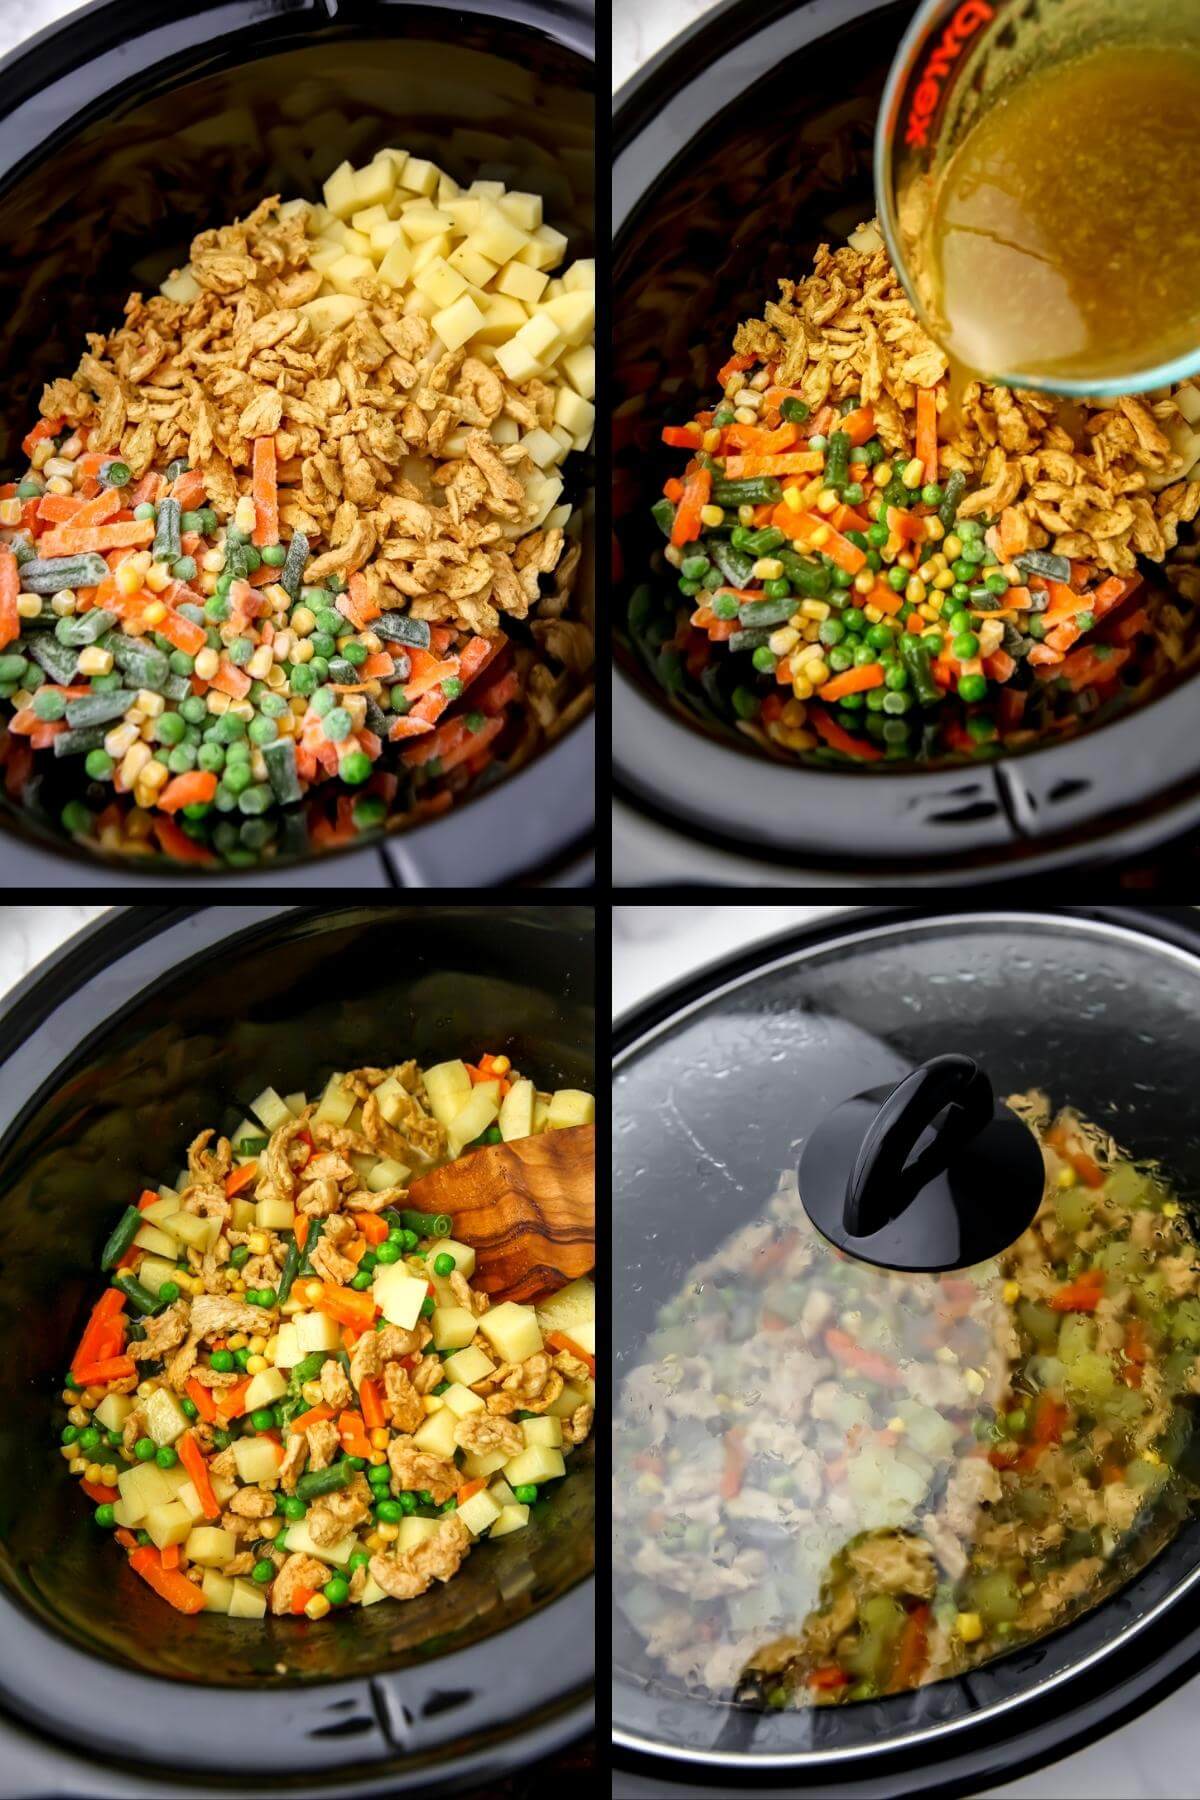 A collage of 4 images showing the process of adding the veggies and vegan chicken to a slow cooker then adding the gravy ingredients and covering it.